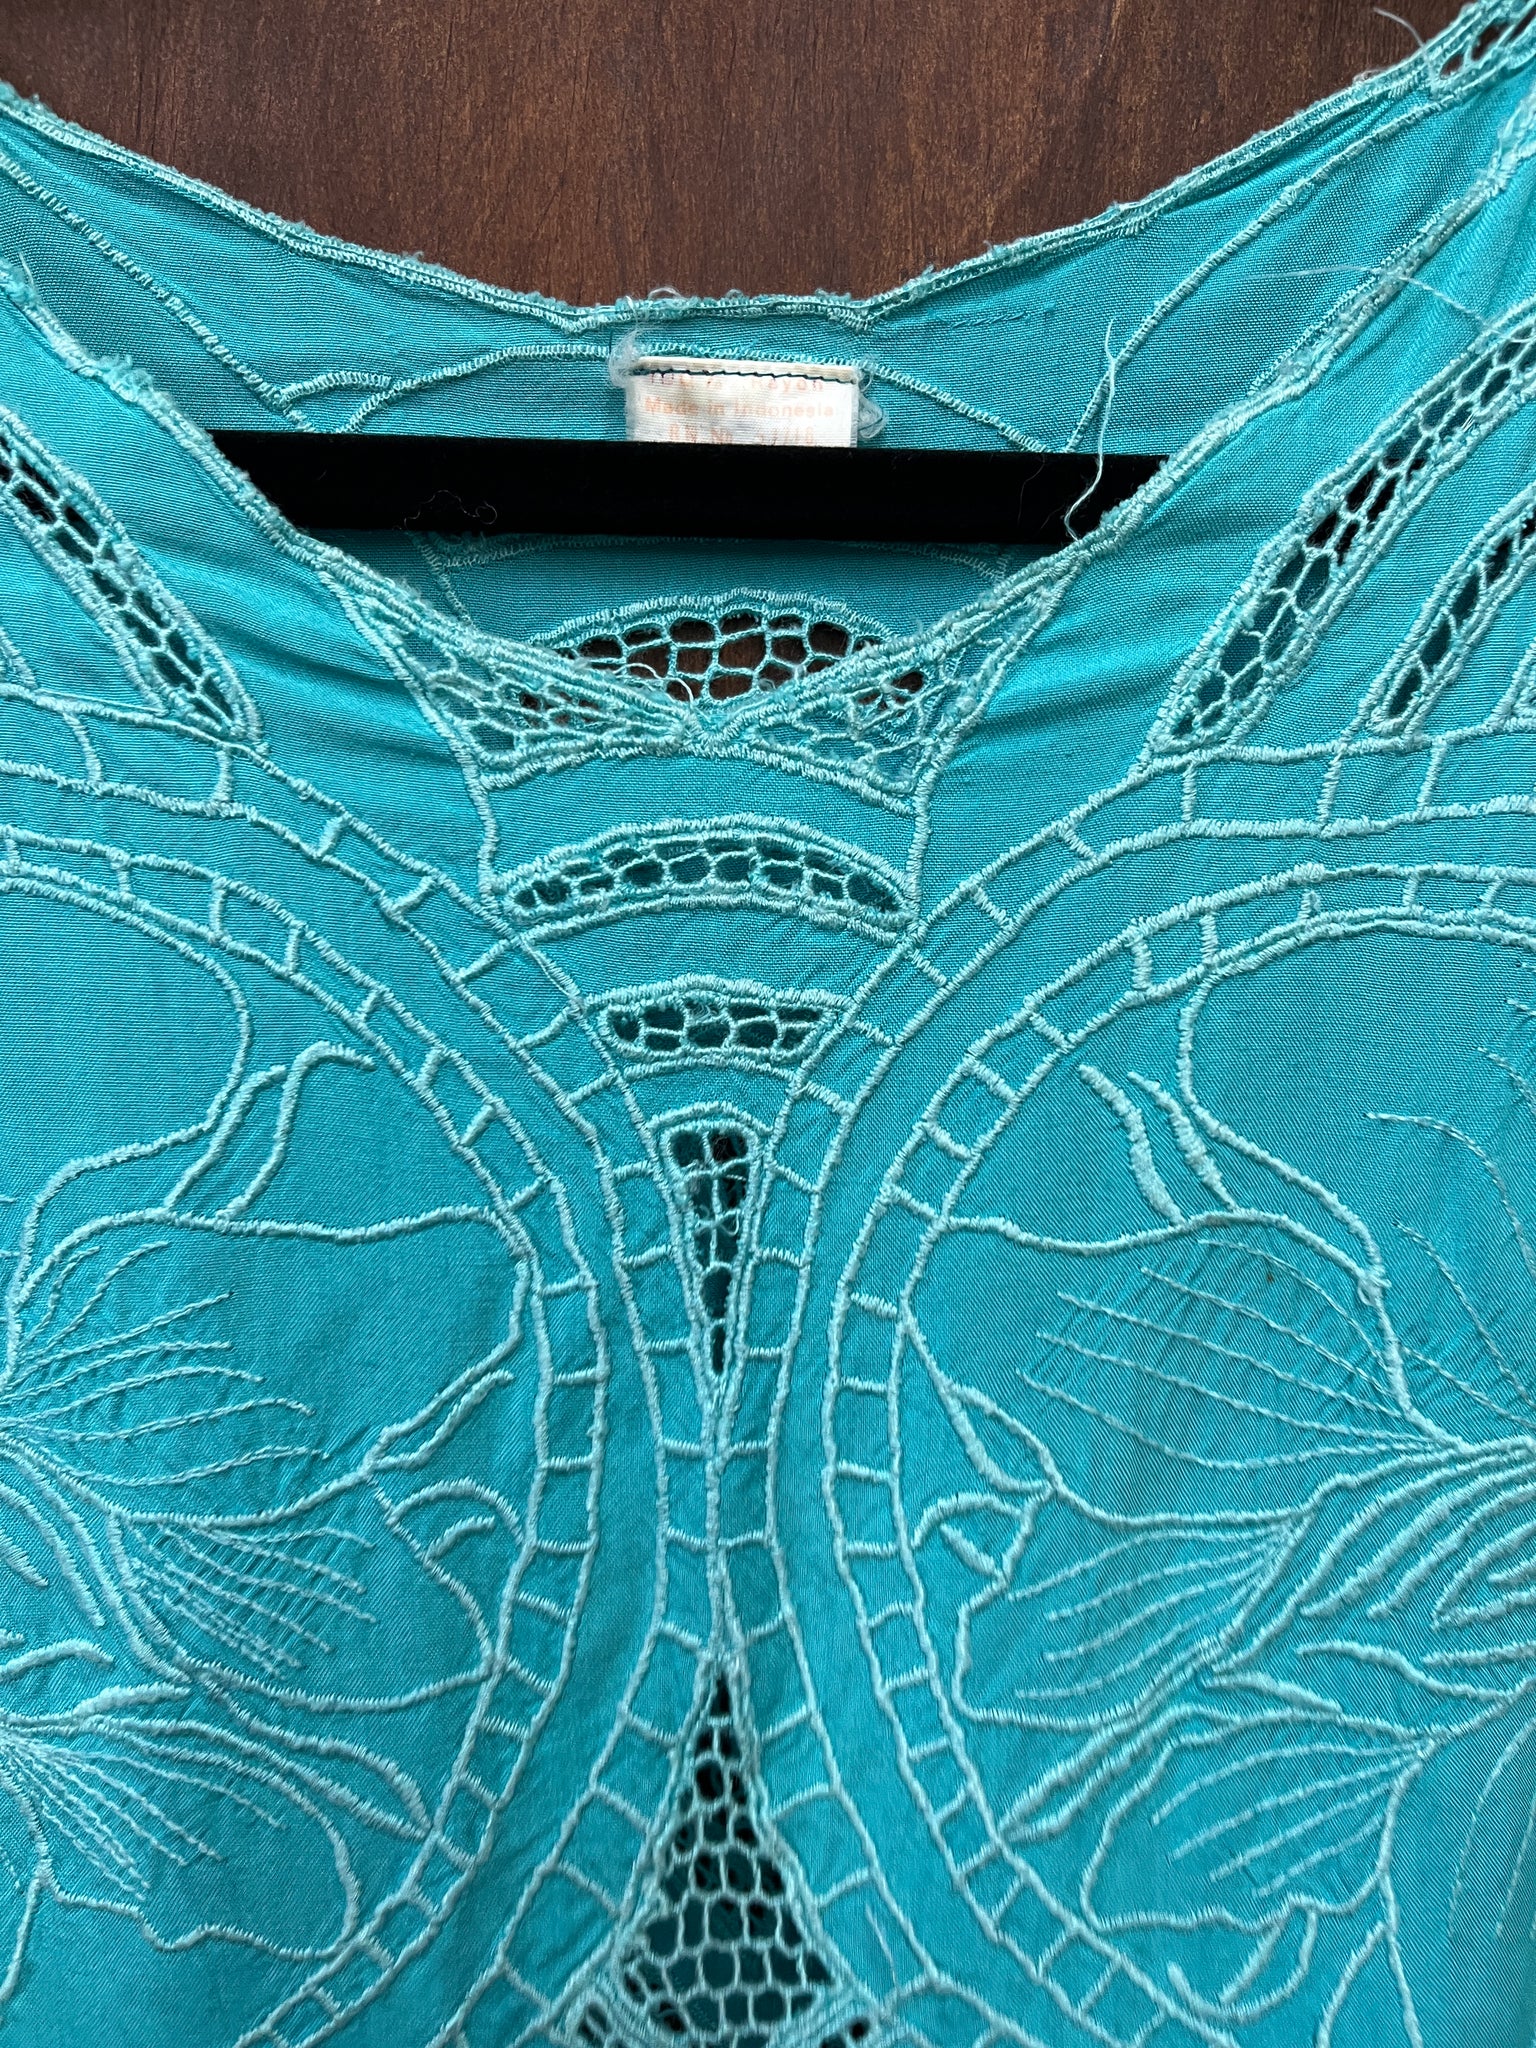 1990s TOP- Turquoise embroidered mesh cutout crop